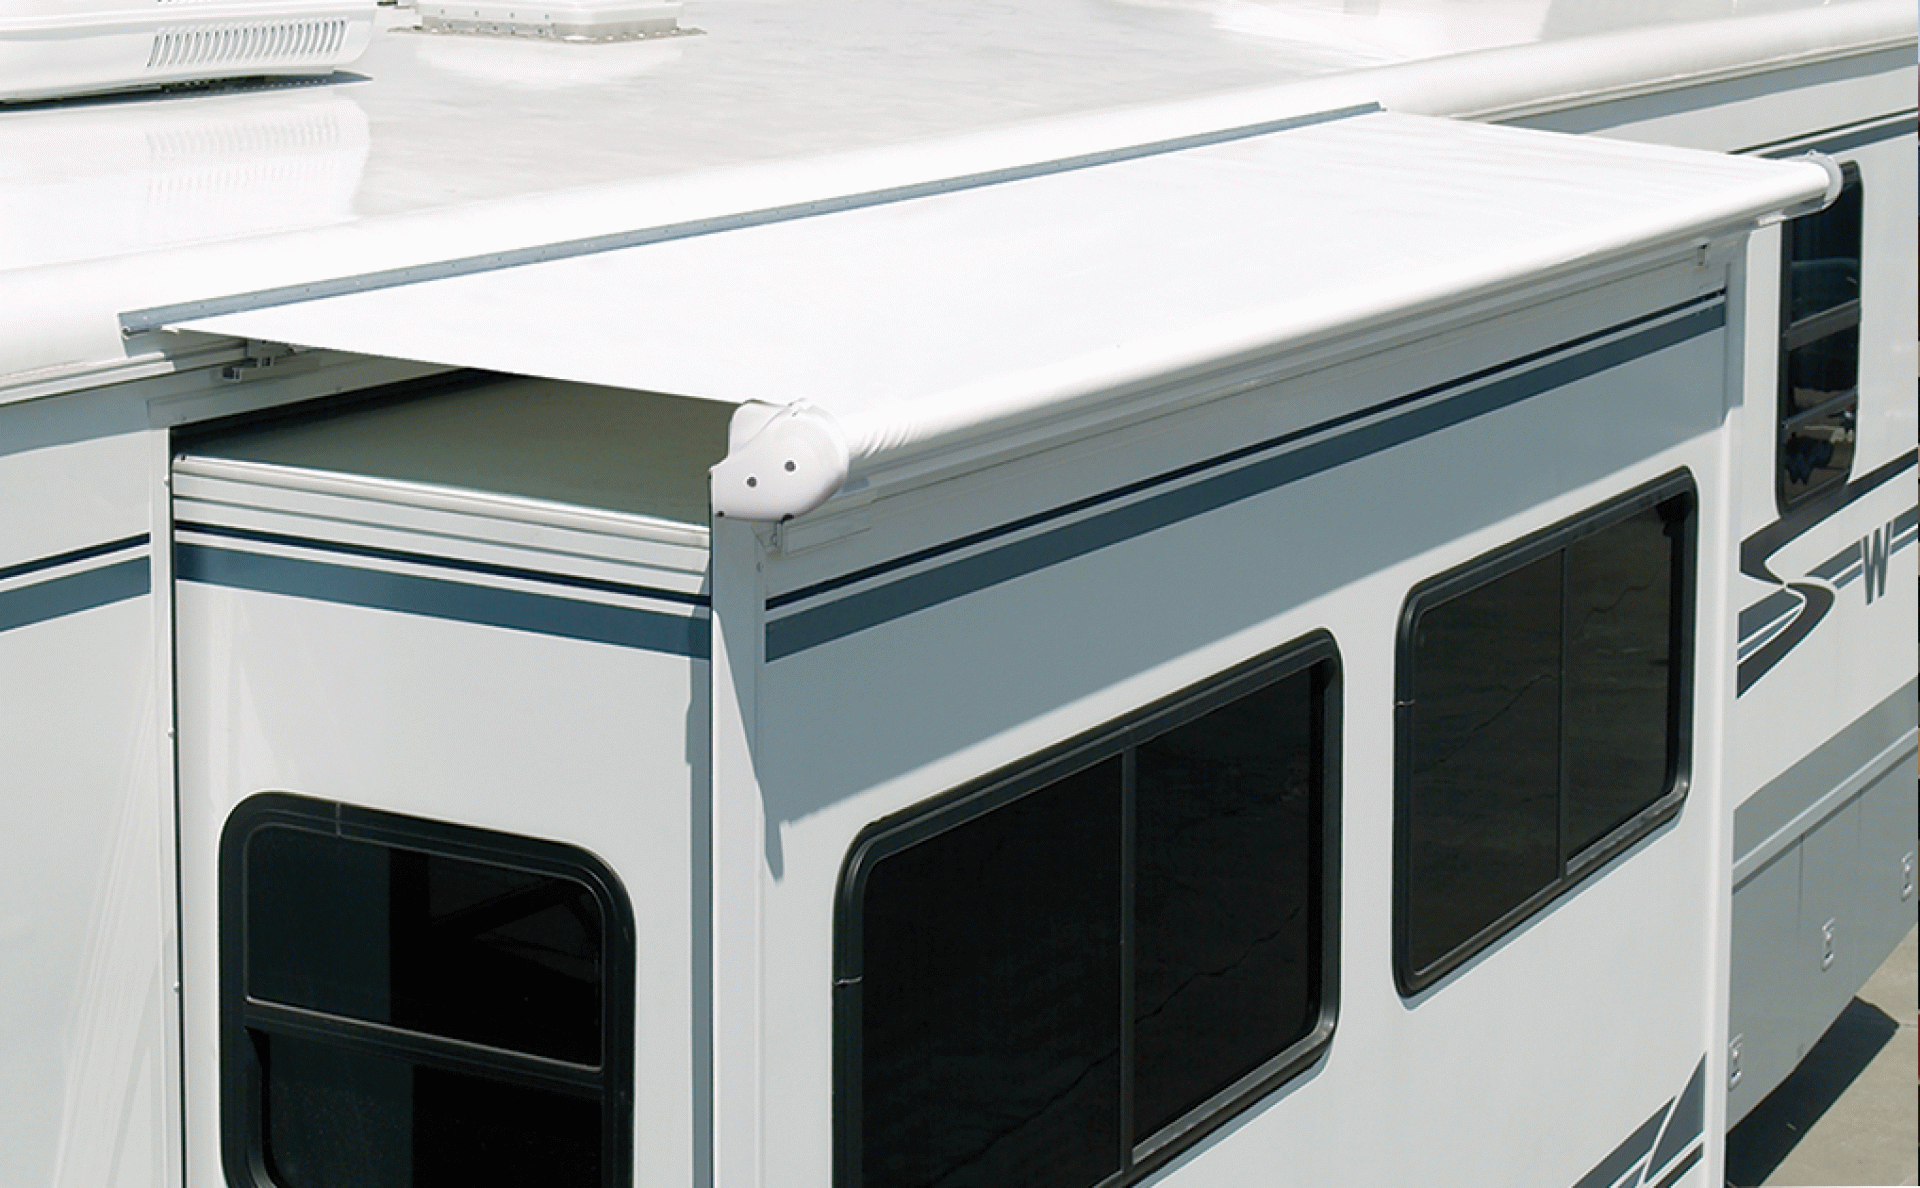 CAREFREE OF COLORADO | UQ1170025 | SIDEOUT KOVER III AWNING 110" - 117" ROOF RANGE WHITE VINYL FABRIC & DEFLECTOR